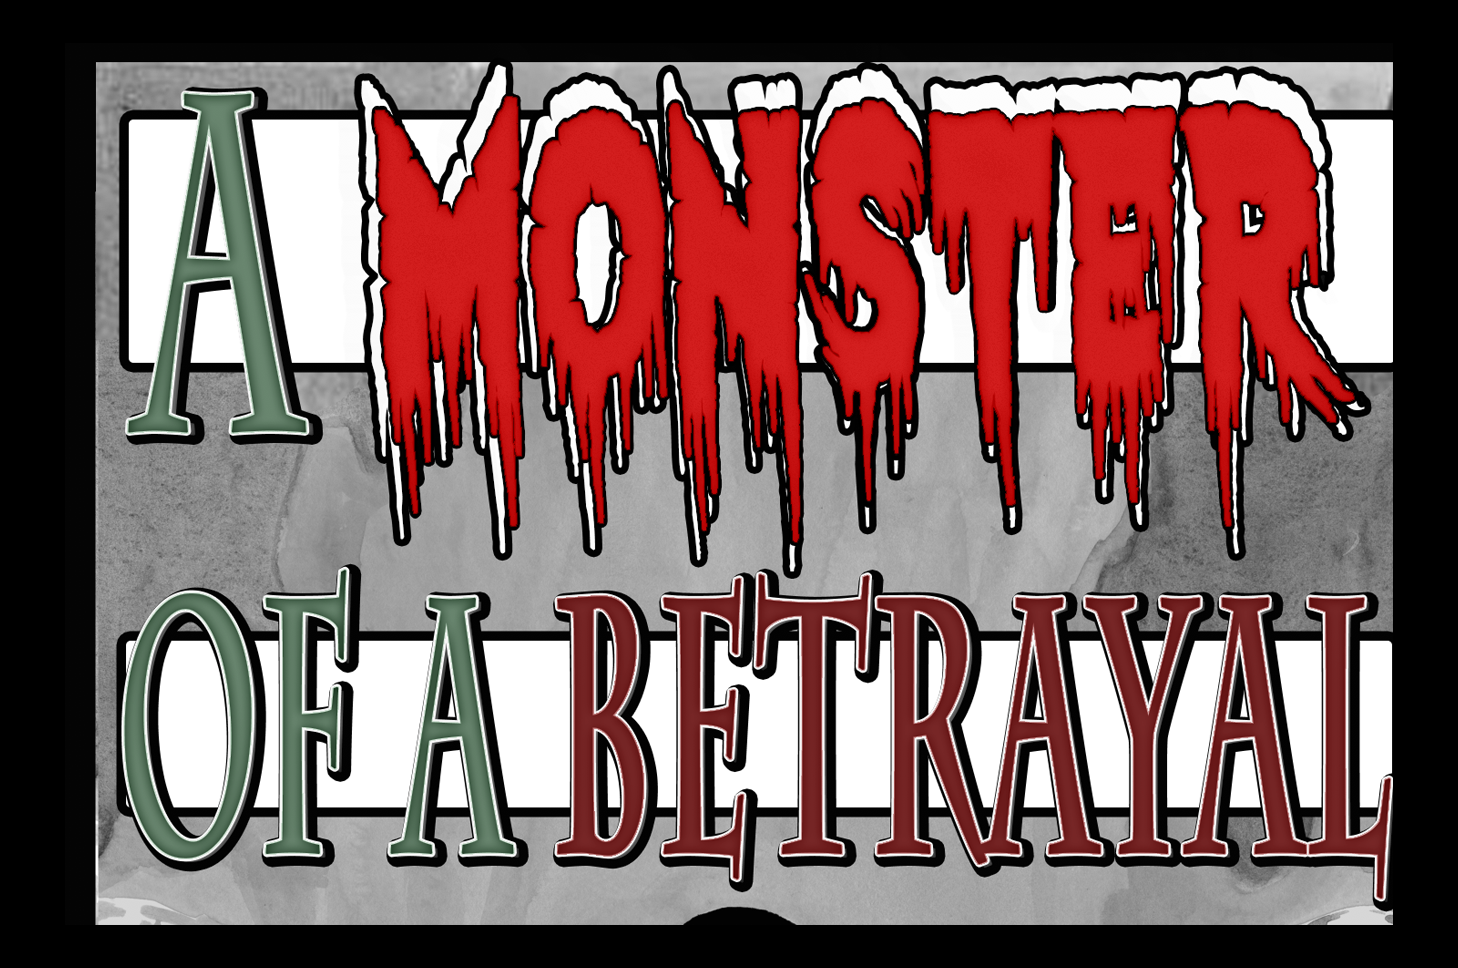 The “MONSTERS” are back in “A MONSTER OF A BETRAYAL”